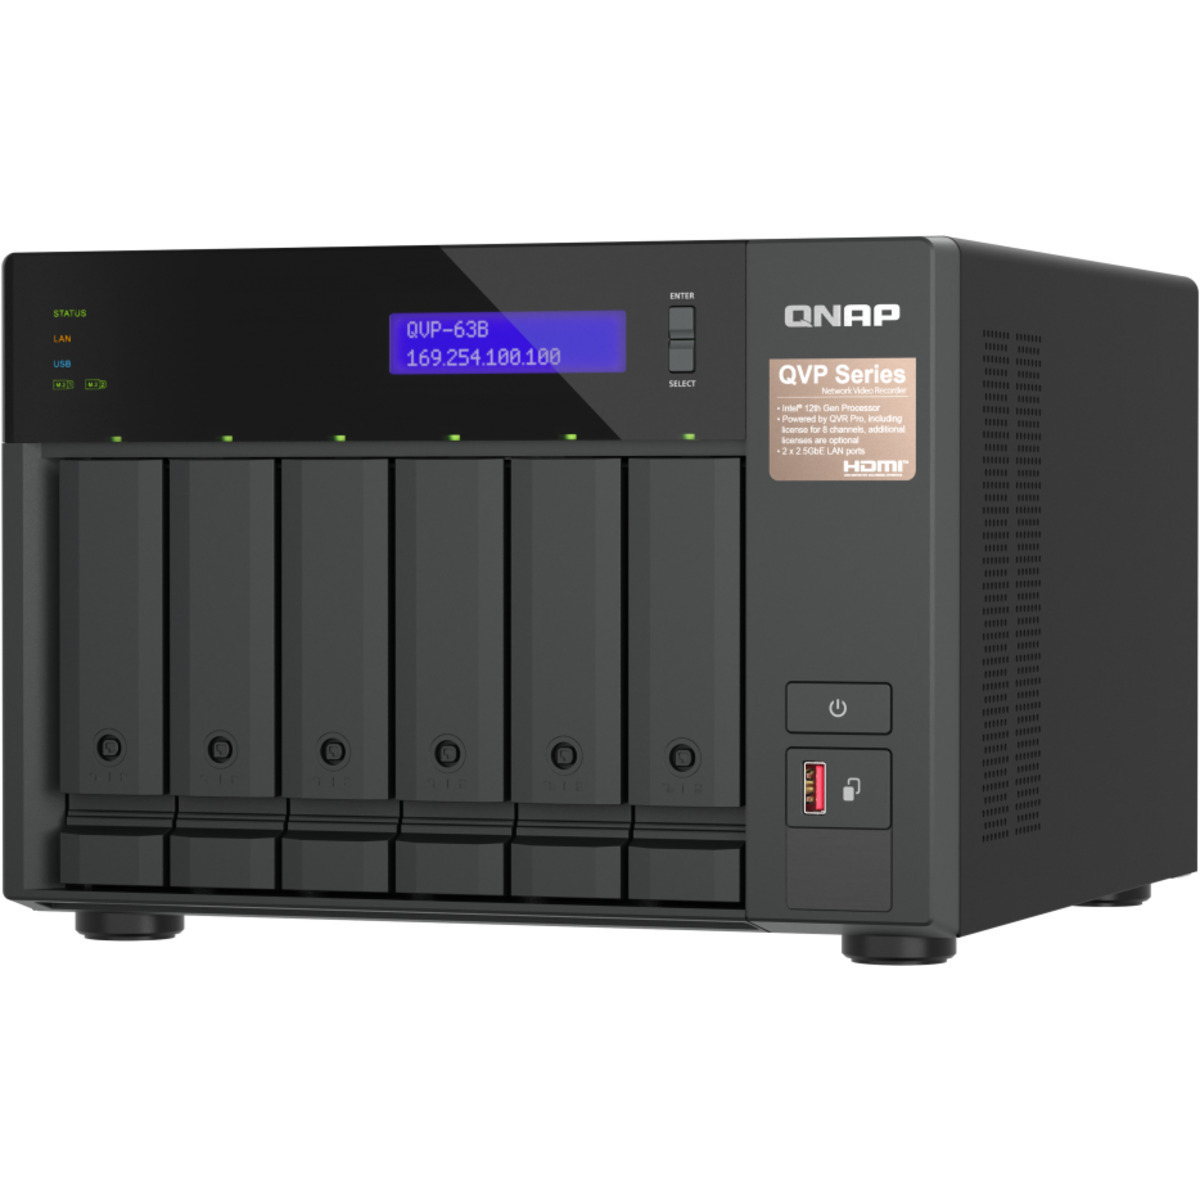 buy QNAP QVP-63B 24tb Desktop NVR - Network Video Recorder 6x4000gb Toshiba MN Series MN08ADA400E 3.5 7200rpm SATA 6Gb/s HDD NAS Class Drives Installed - Burn-In Tested - ON SALE - nas headquarters buy network attached storage server device das new raid-5 free shipping simply usa christmas holiday black friday cyber monday week sale happening now! QVP-63B